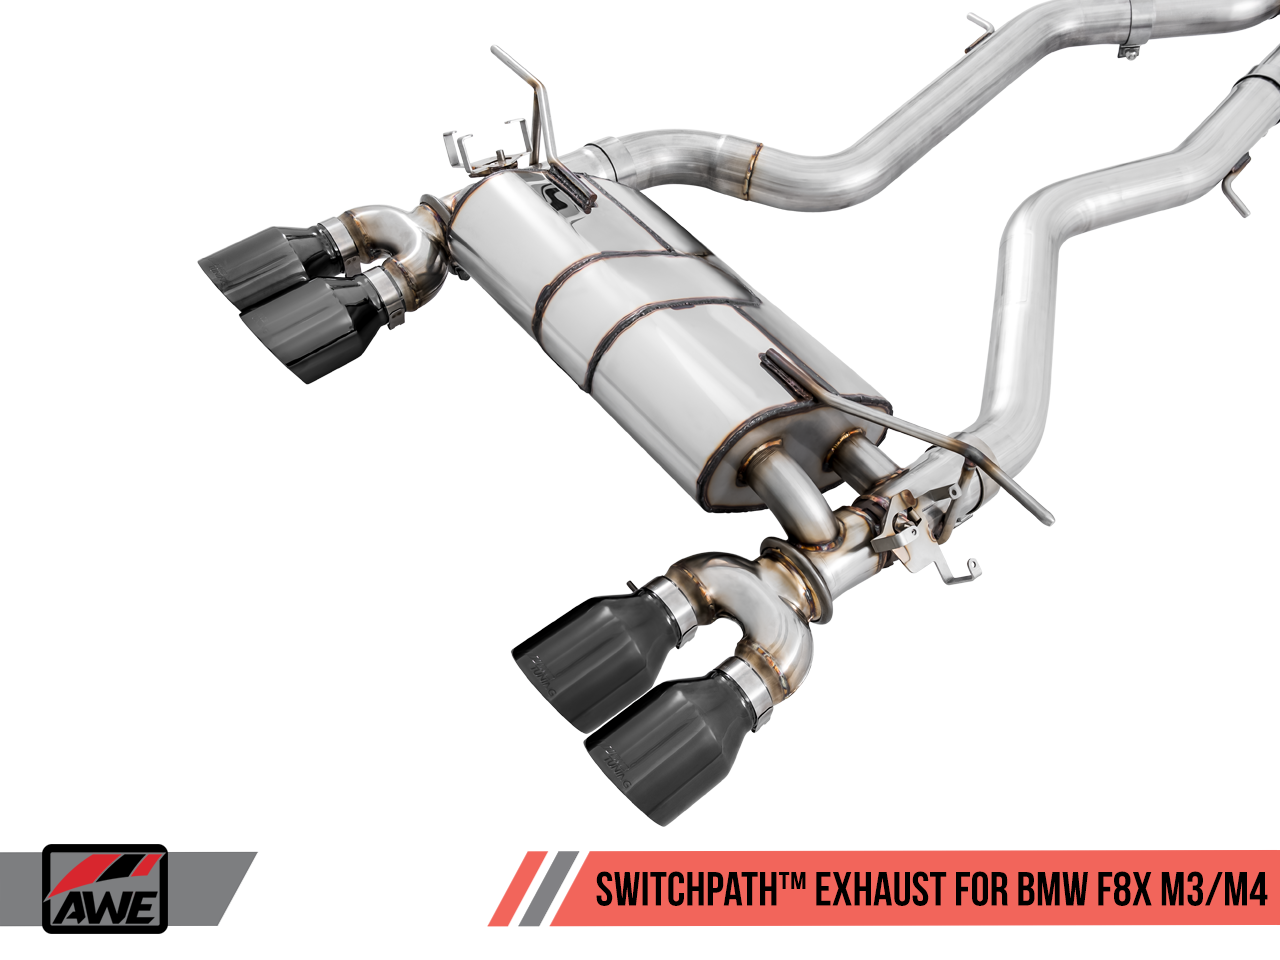 AWE Resonated SwitchPath™ Exhaust for BMW F8X M3 / M4 -- Chrome Silver Tips (102mm)